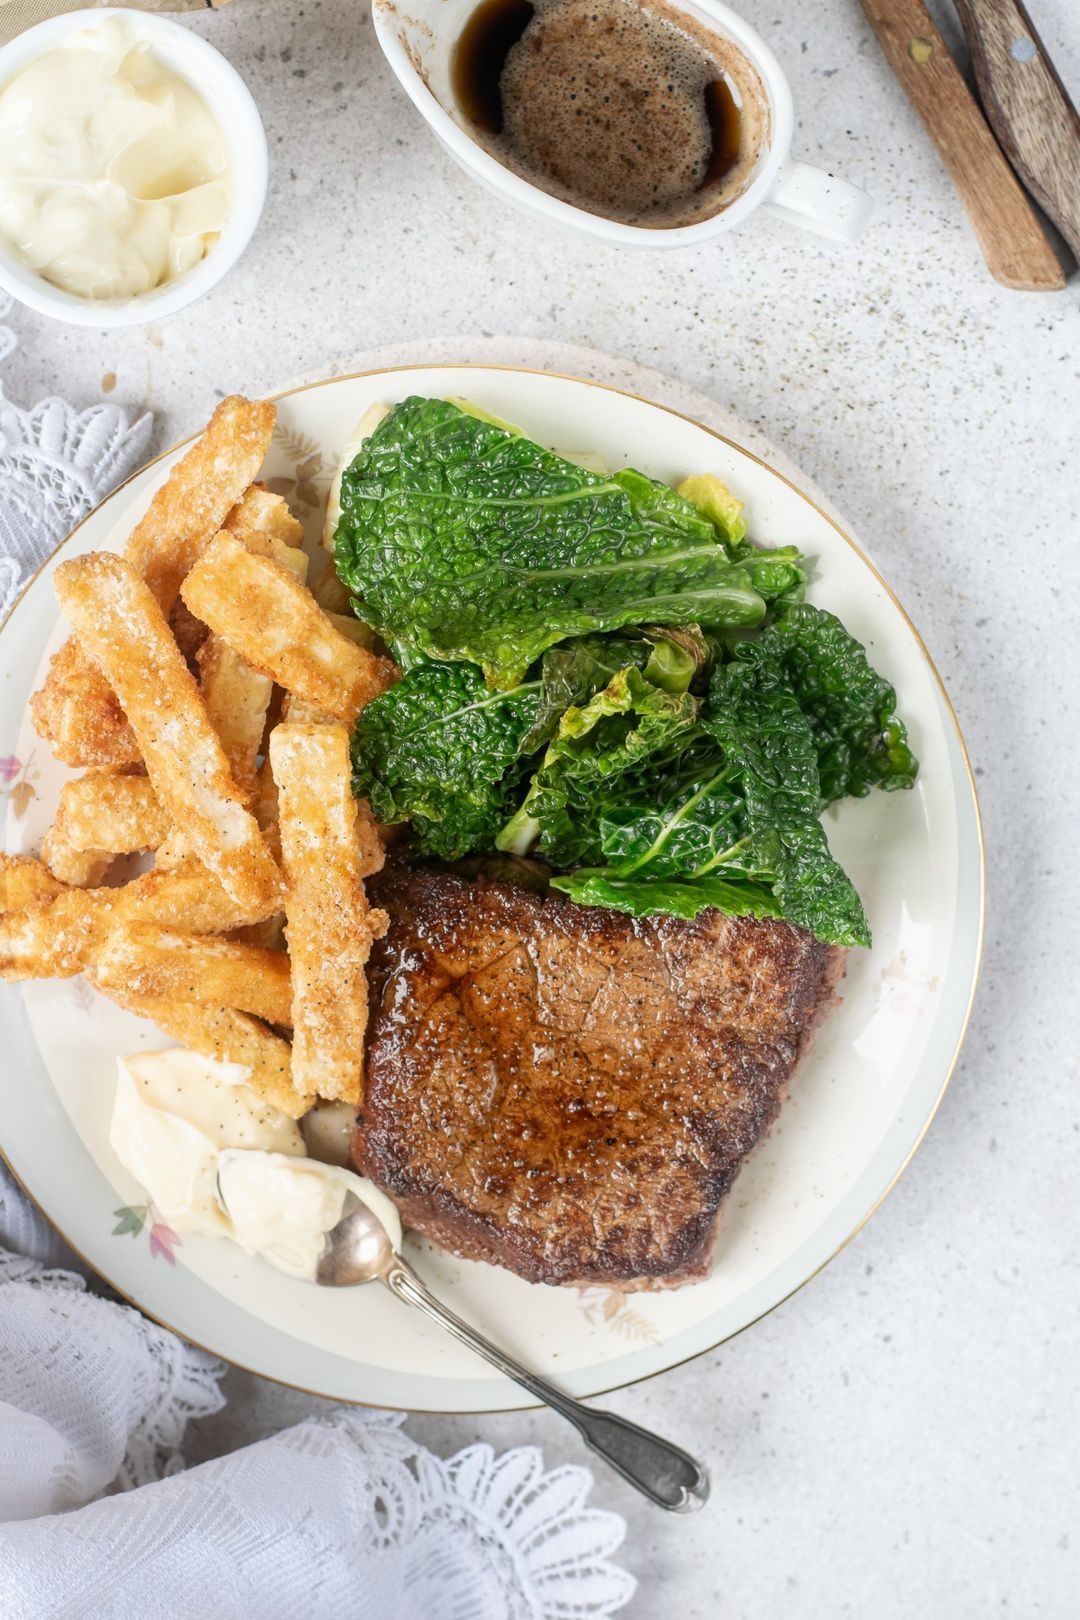 Steak with green cabbage and celeriac fries